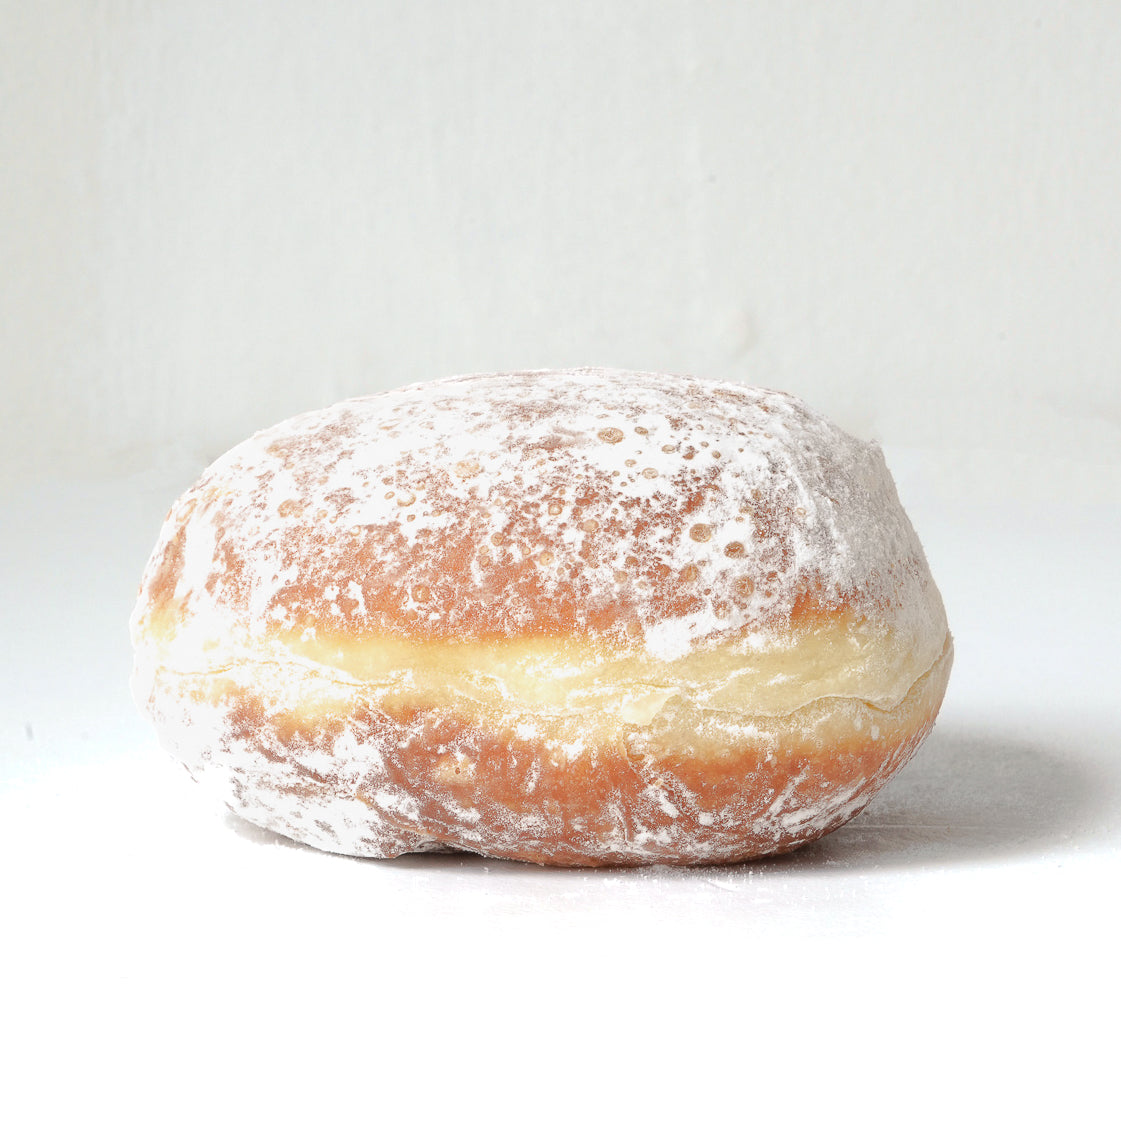 image of a whole doughnut covered in a white sugar icing